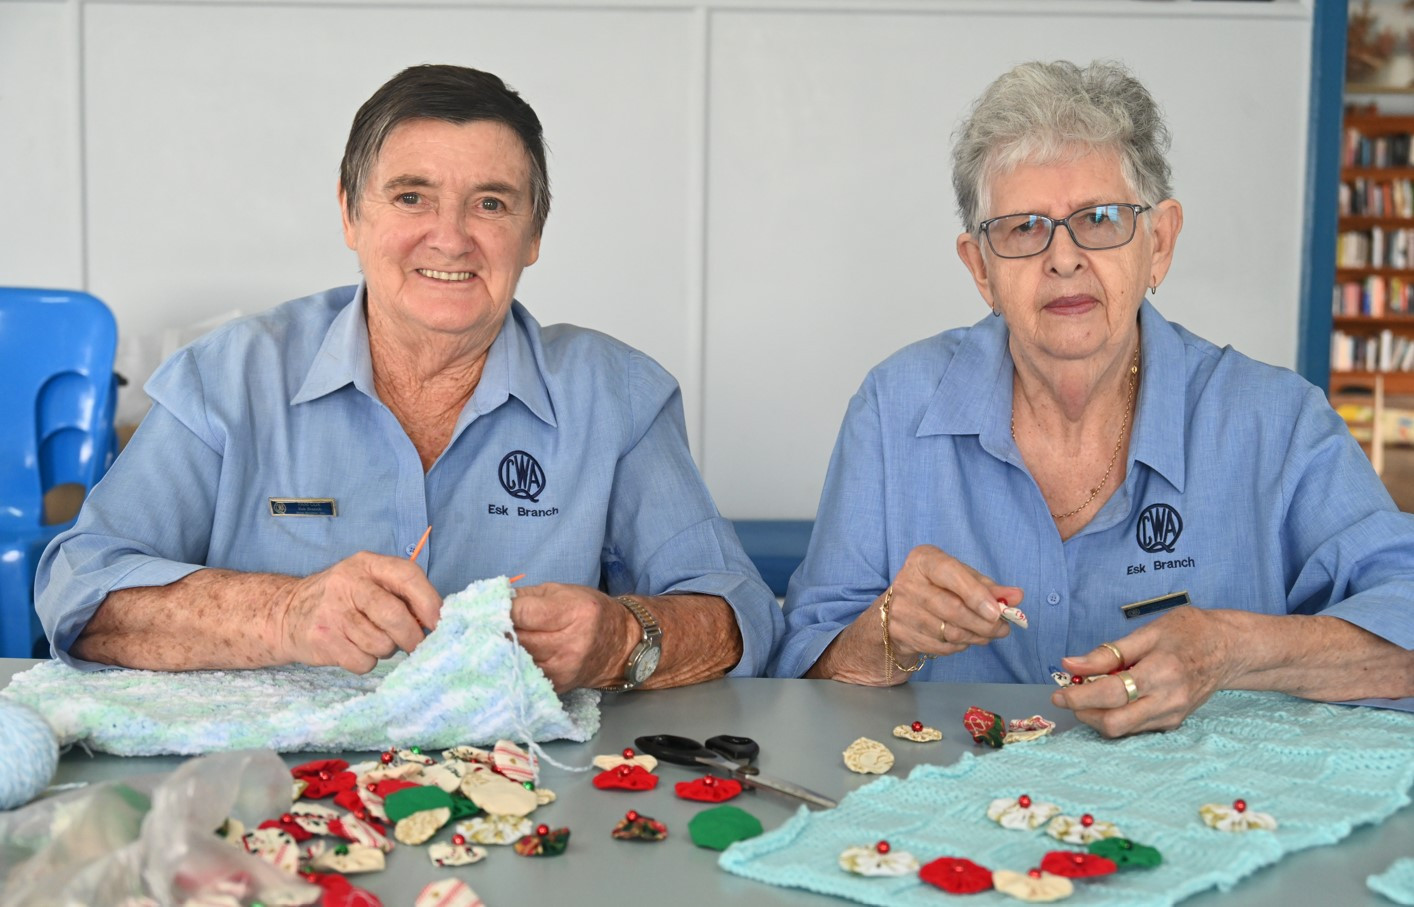 Pamela (left) and Valerie (right) knitting the tree sweaters.